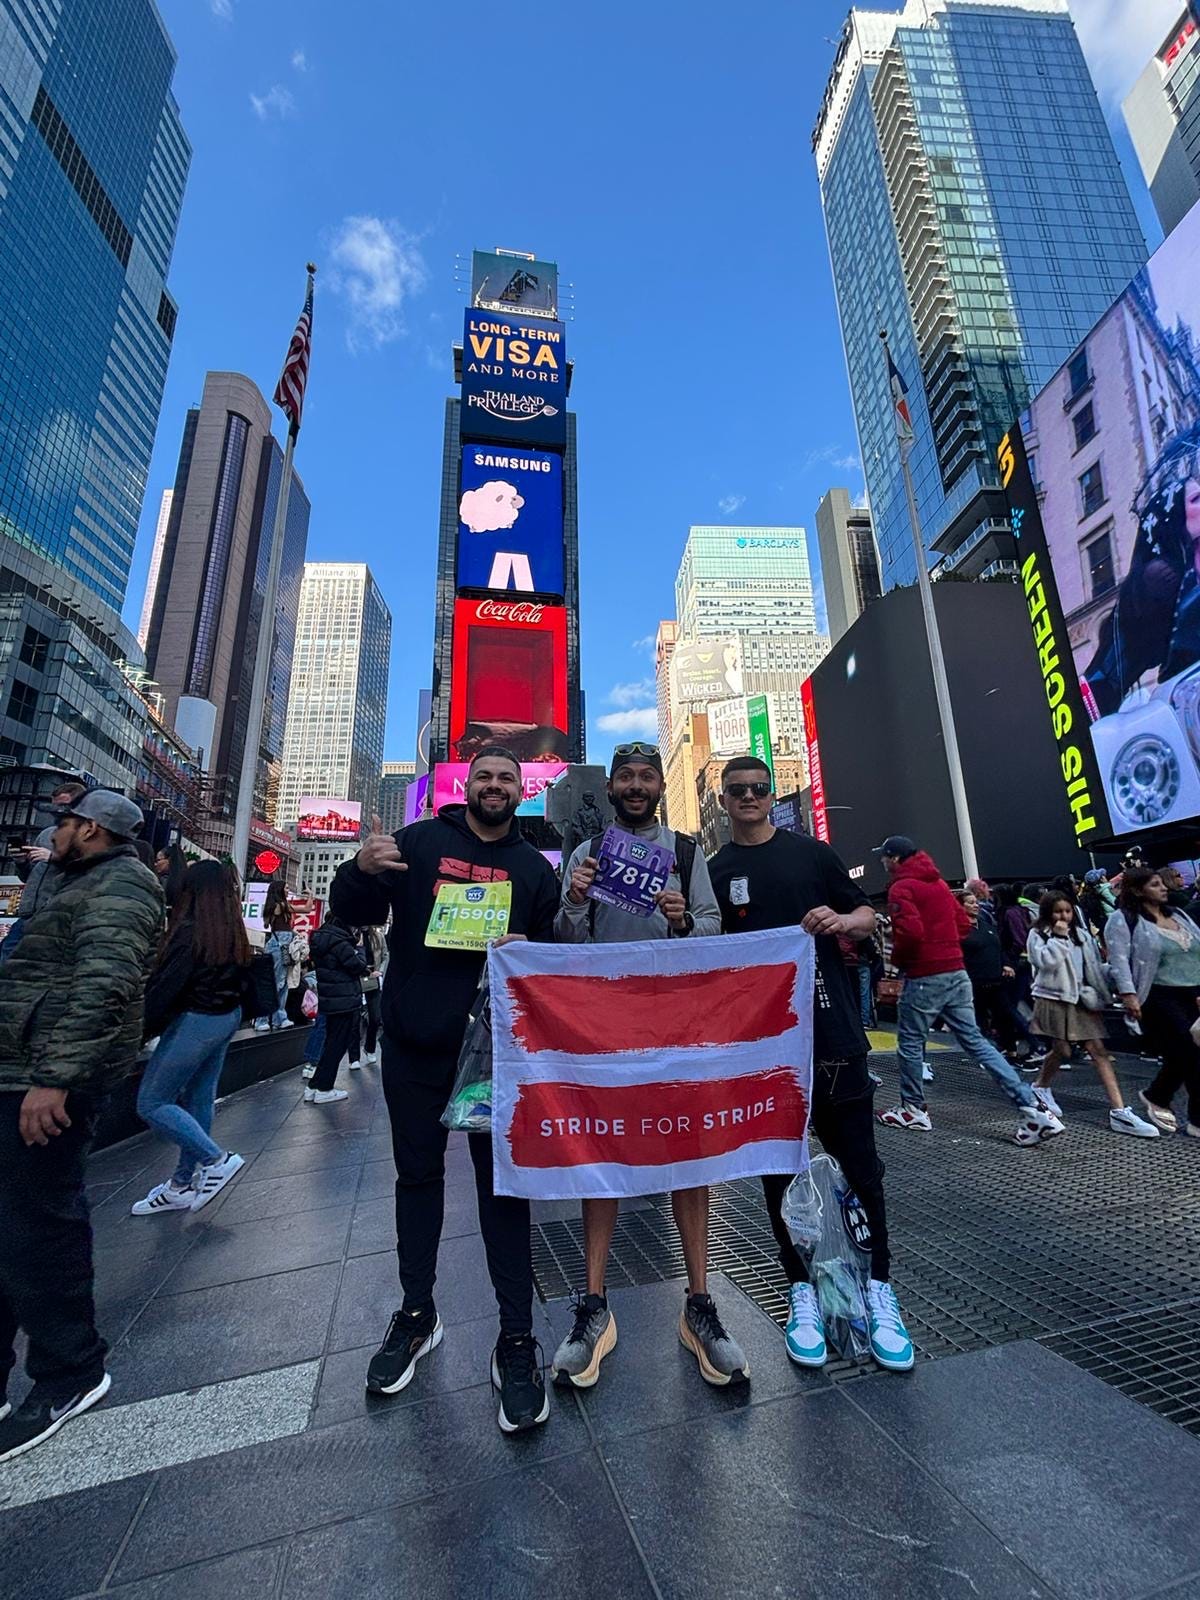 Brian, Ozcar, and Hector in Times Square before the NYC Half. 